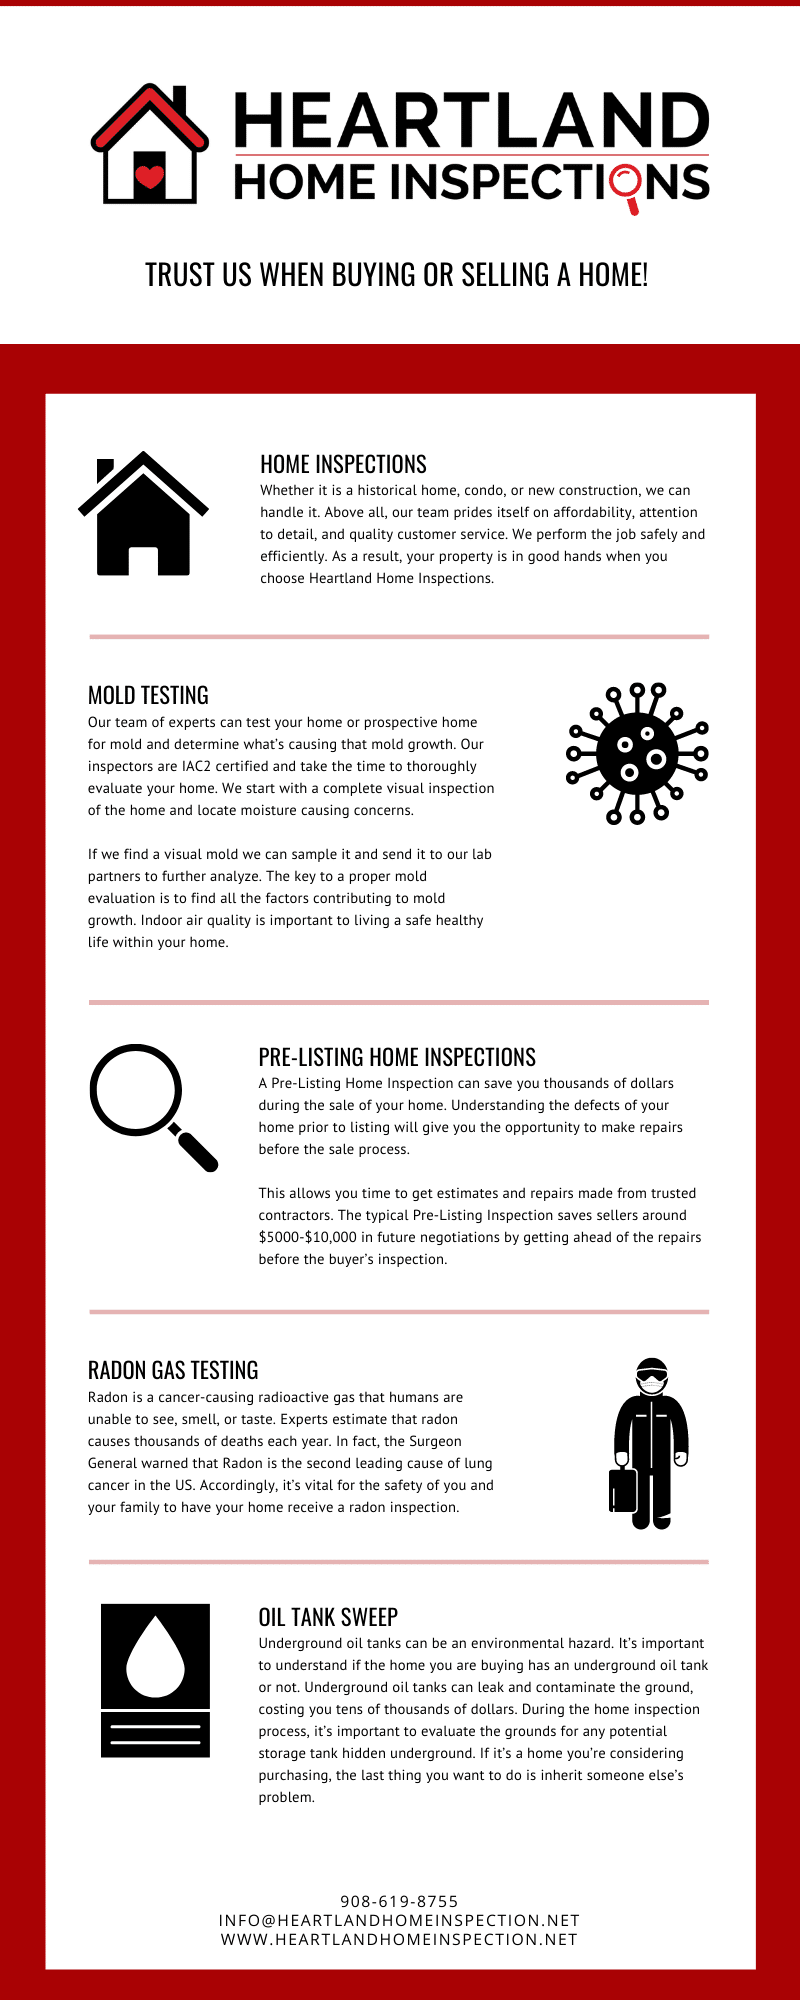 Heartland Home Inspection Infographic